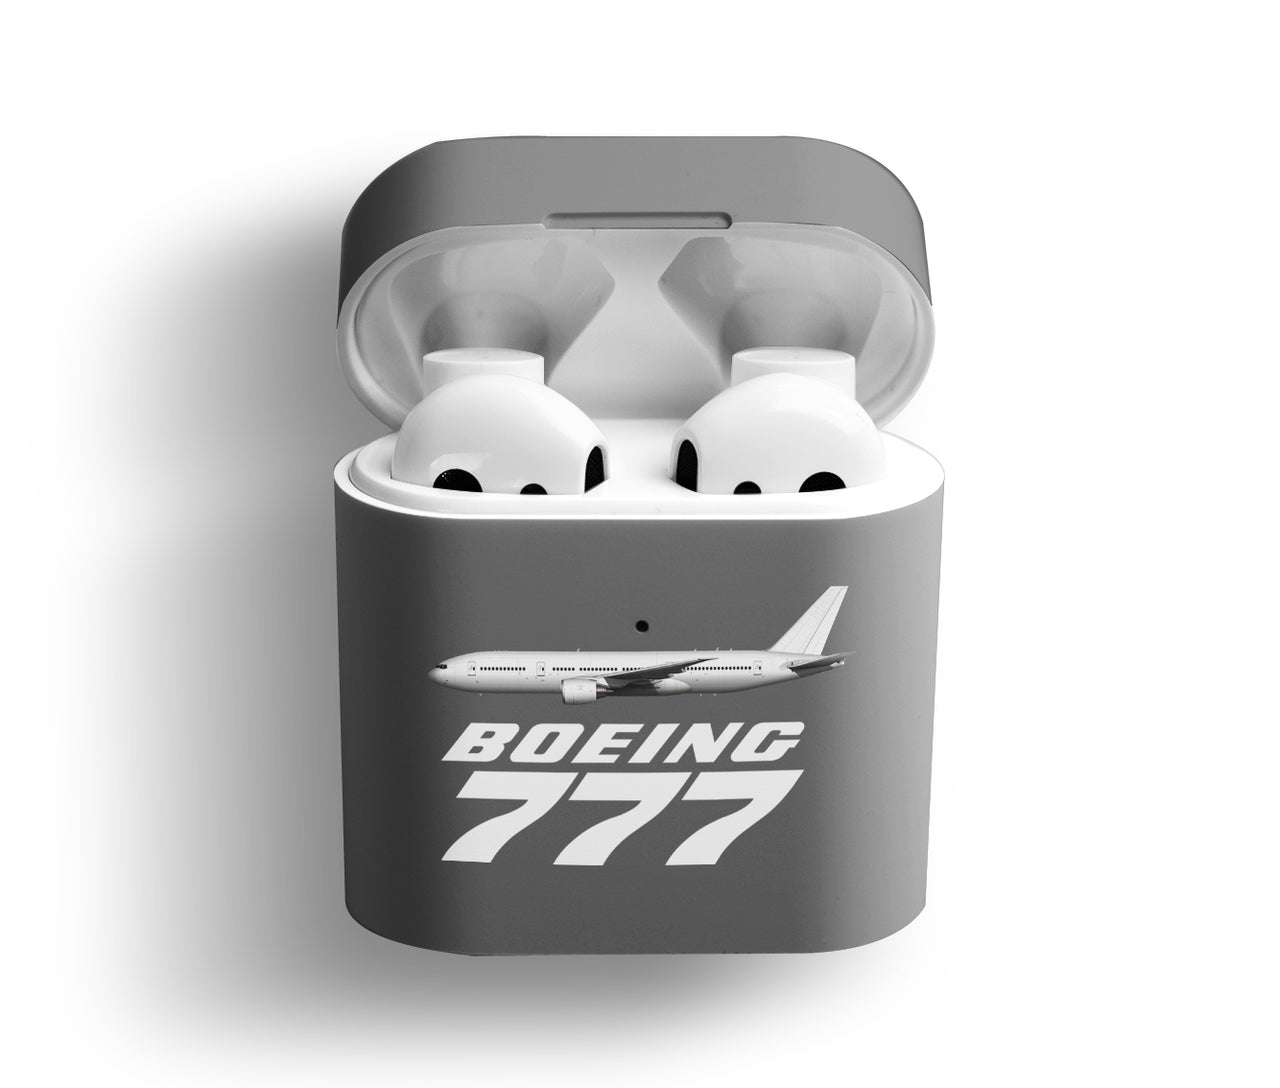 The Boeing 777 Designed AirPods  Cases